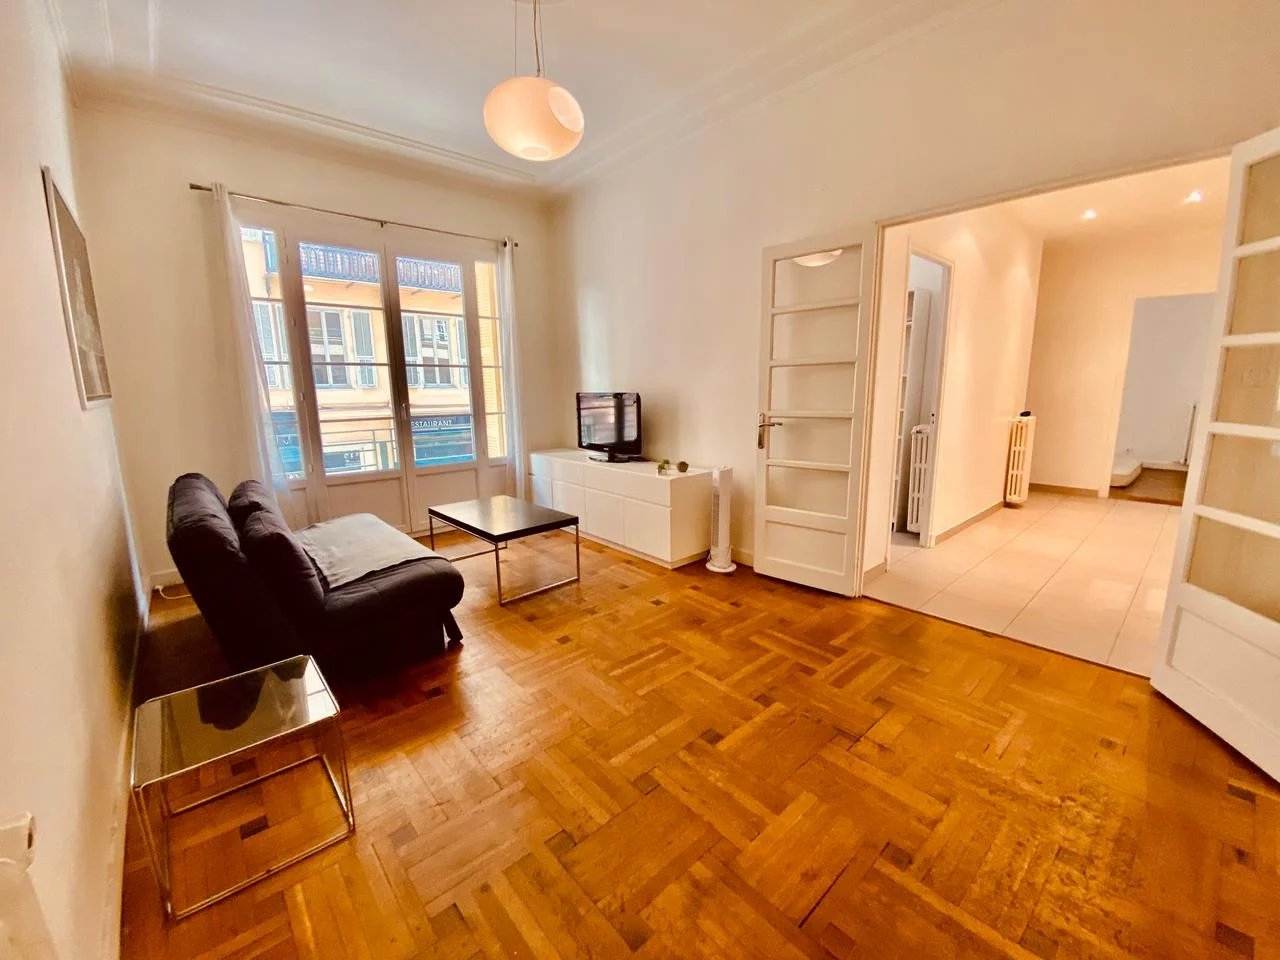 Appartement  2 Rooms 53m2  for sale   339 000 €